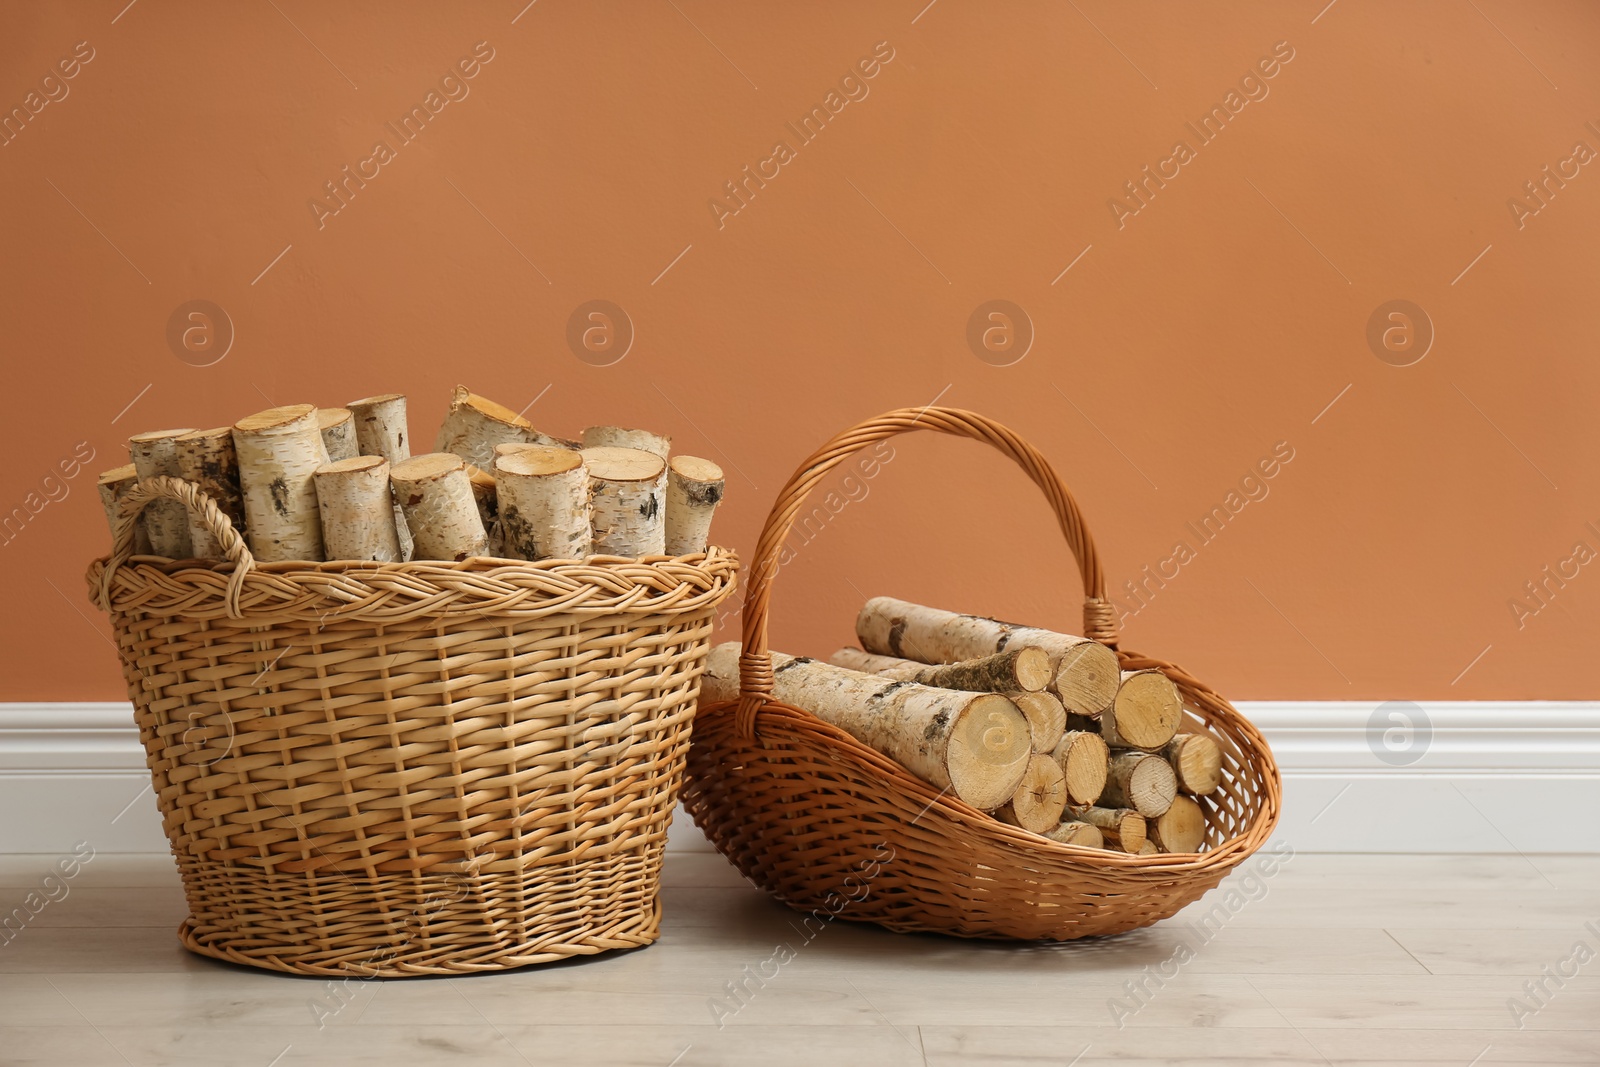 Photo of Wicker baskets with firewood near brown wall indoors